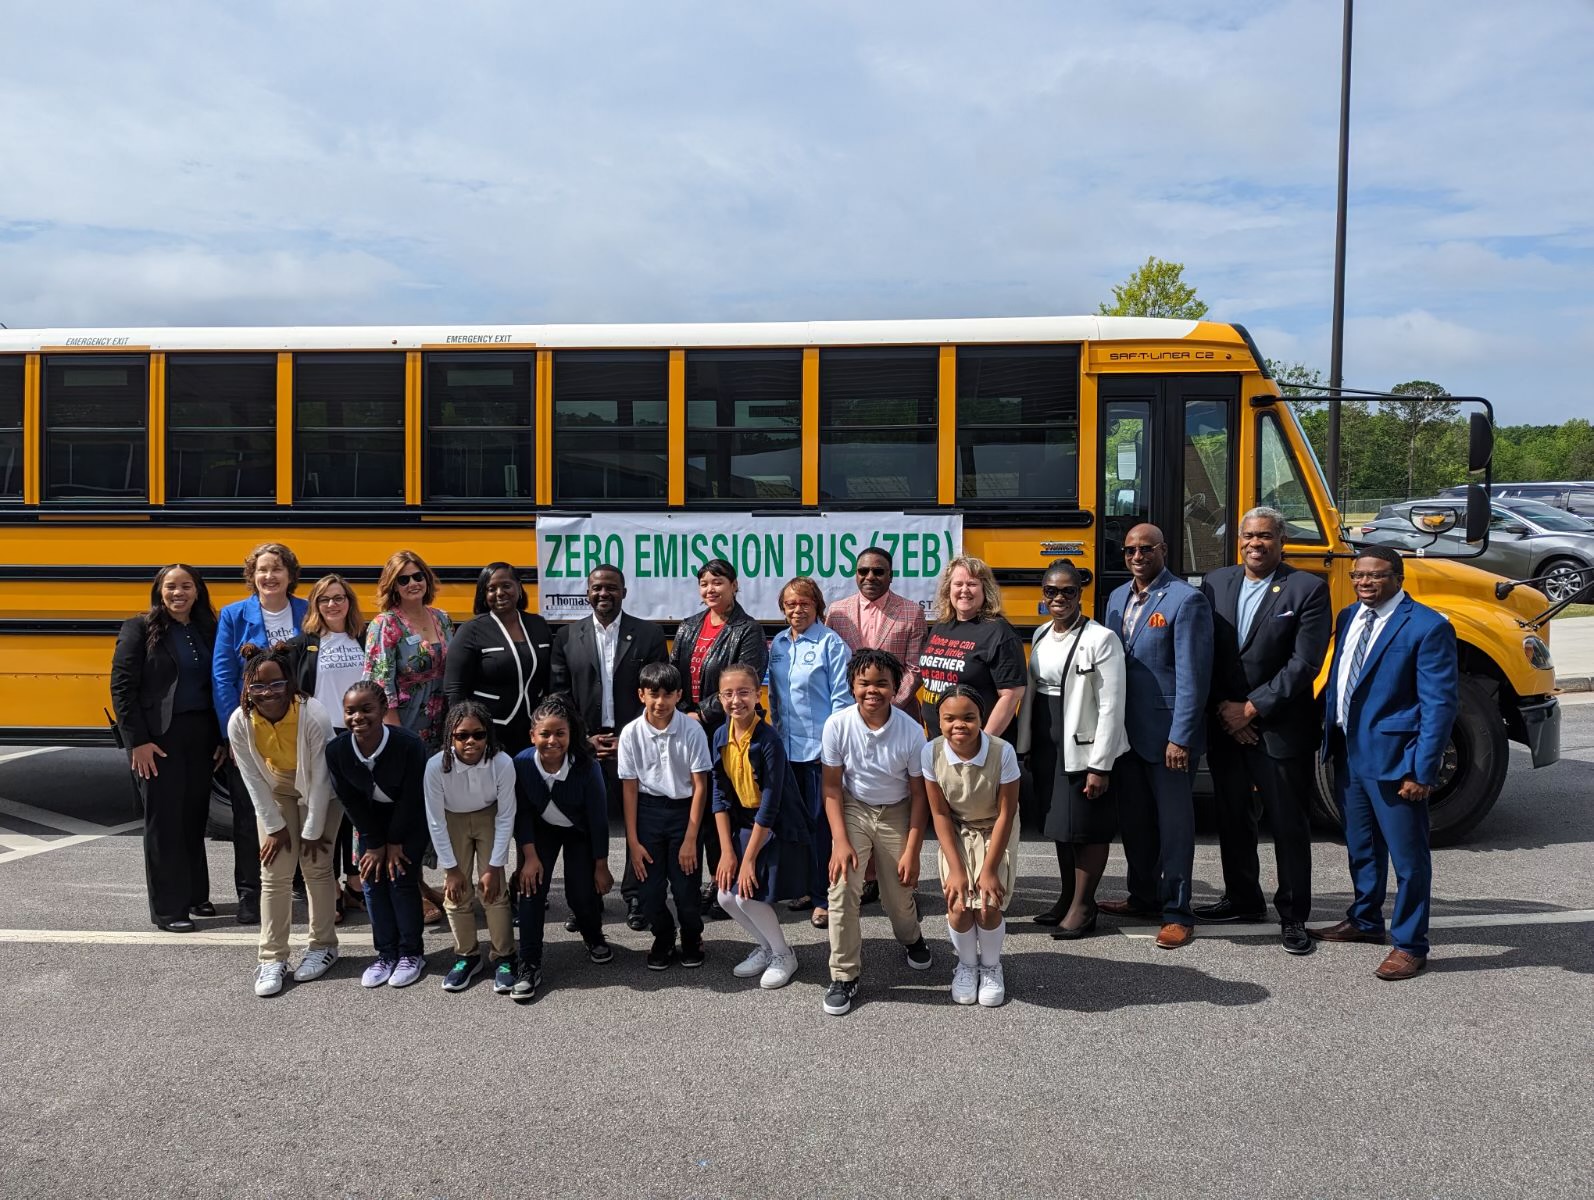 Congratulations To All The Georgia School Districts Getting New Clean Electric School Buses!